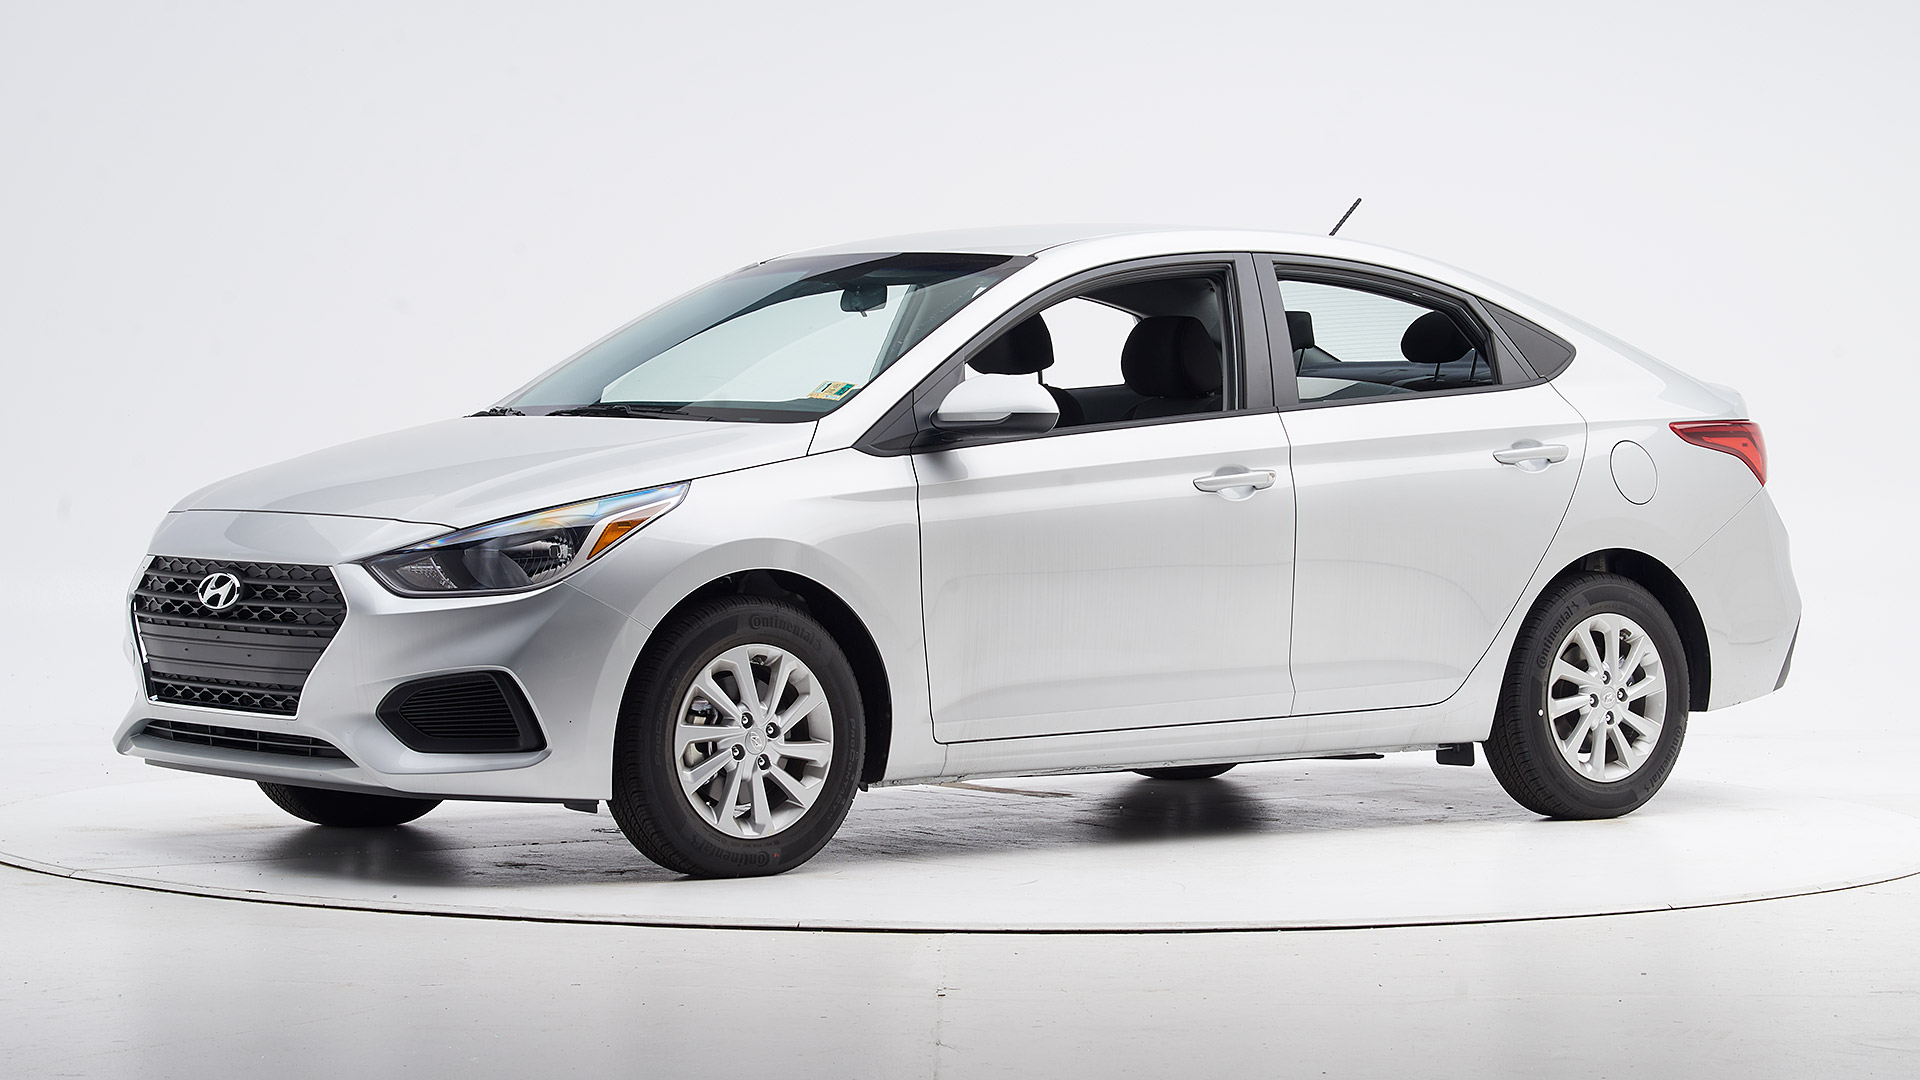 2018 Hyundai Accent Do ty have an anccent? iihs